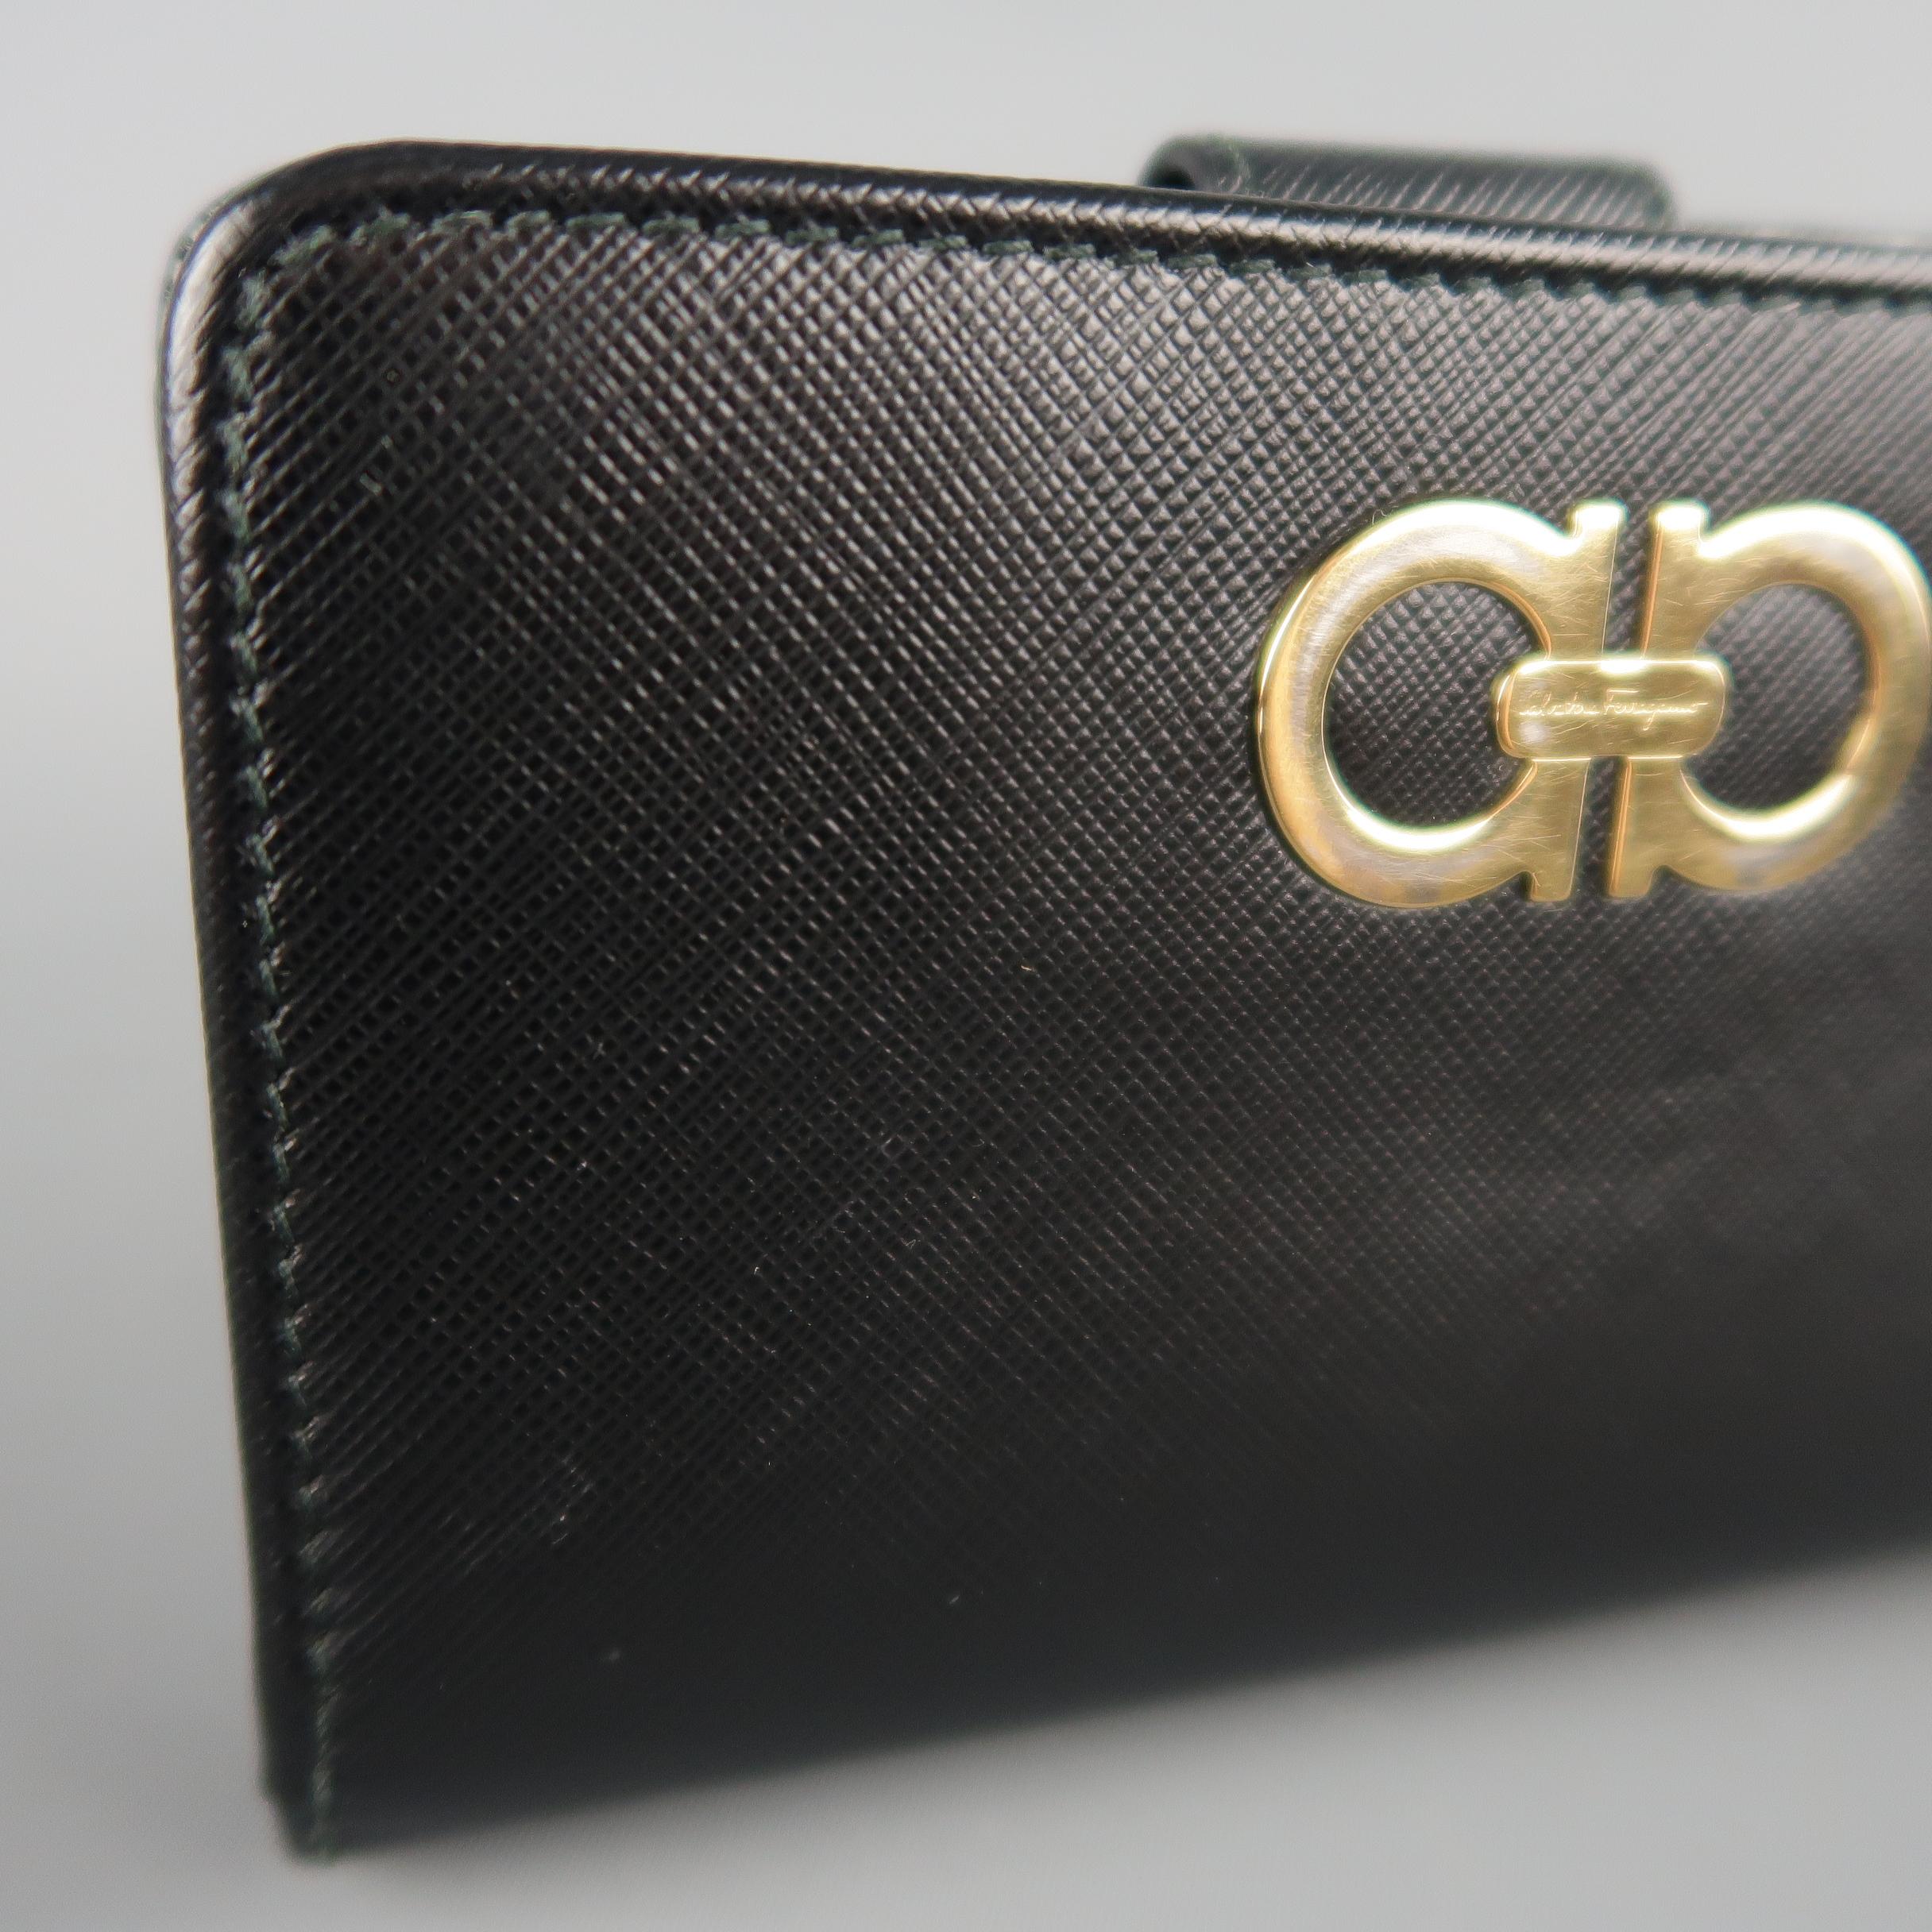 SALVATORE FERRAGAMO wallet comes in black Saffiano textured leather with a snap tab card slot compartment, zip pouch, and gold tone double Gancini logo embellishment. Some Discoloration on hardware. Made in Italy.
 
Good Pre-Owned Condition.
